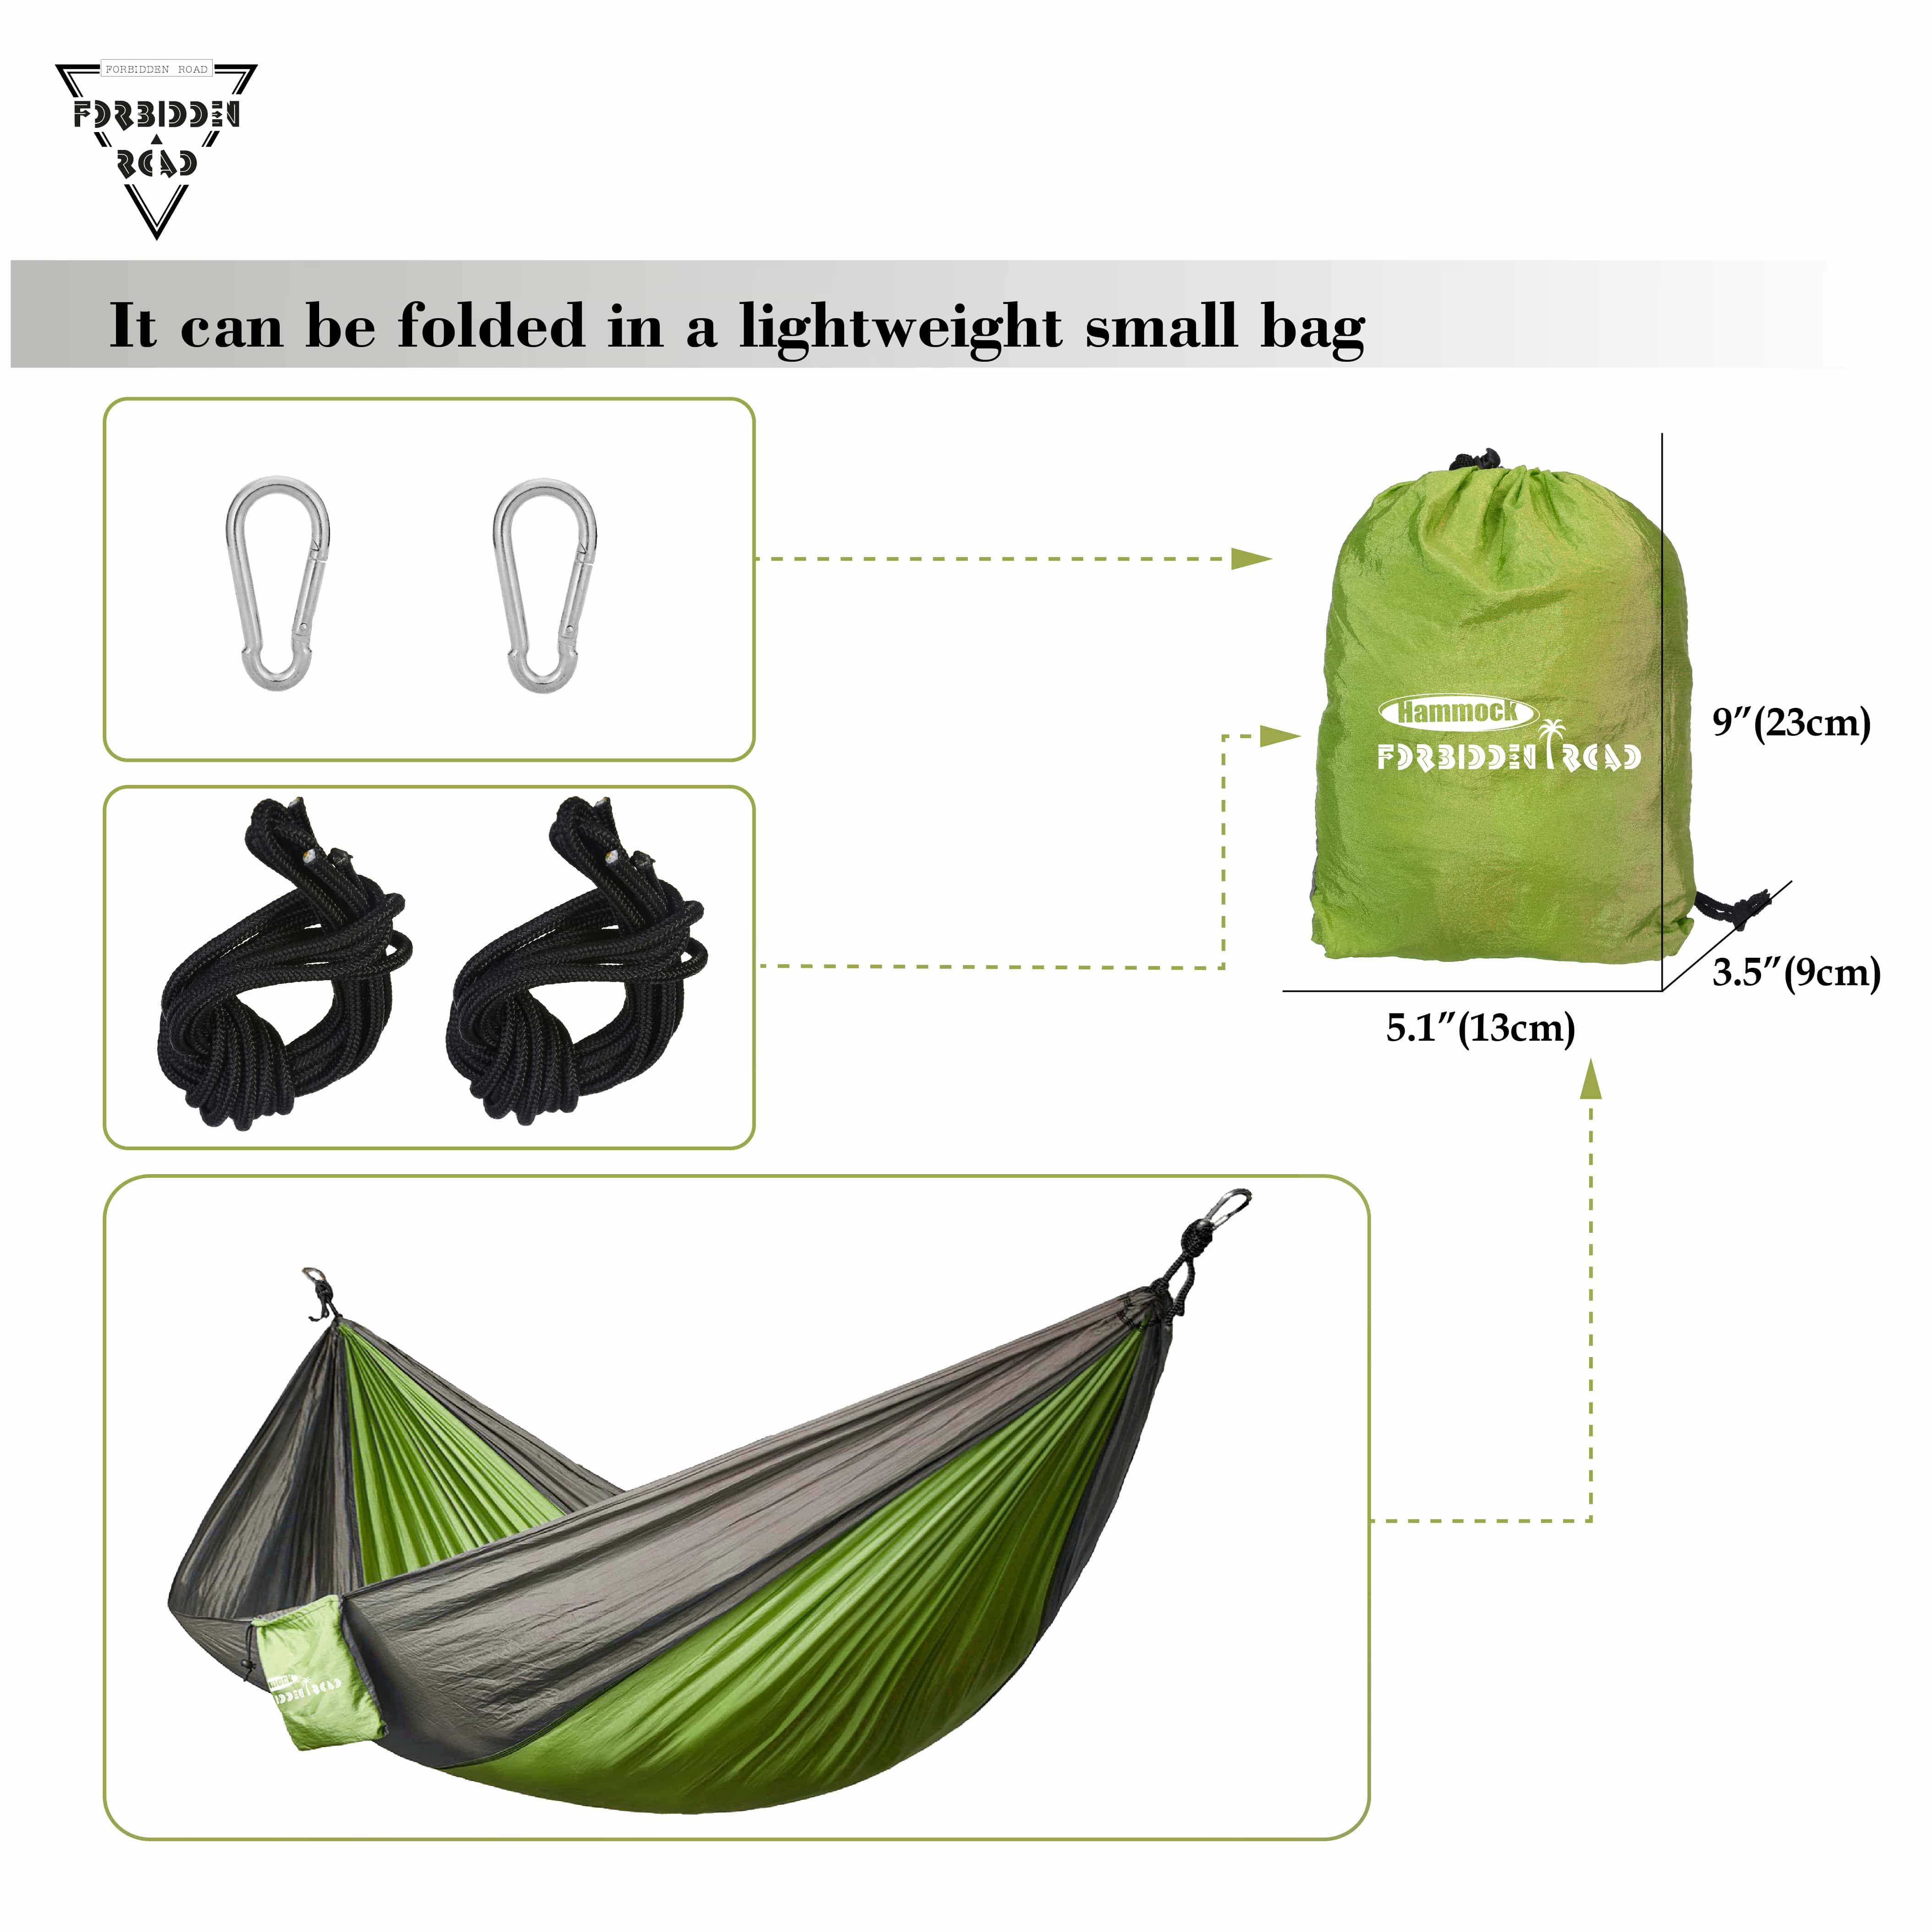 Buy Forbidden Road Single & Double Hammock for Camping Garden 210D Nylon  Support 500lbs Ropes Carabiners Included - Green Online from JBM Gear